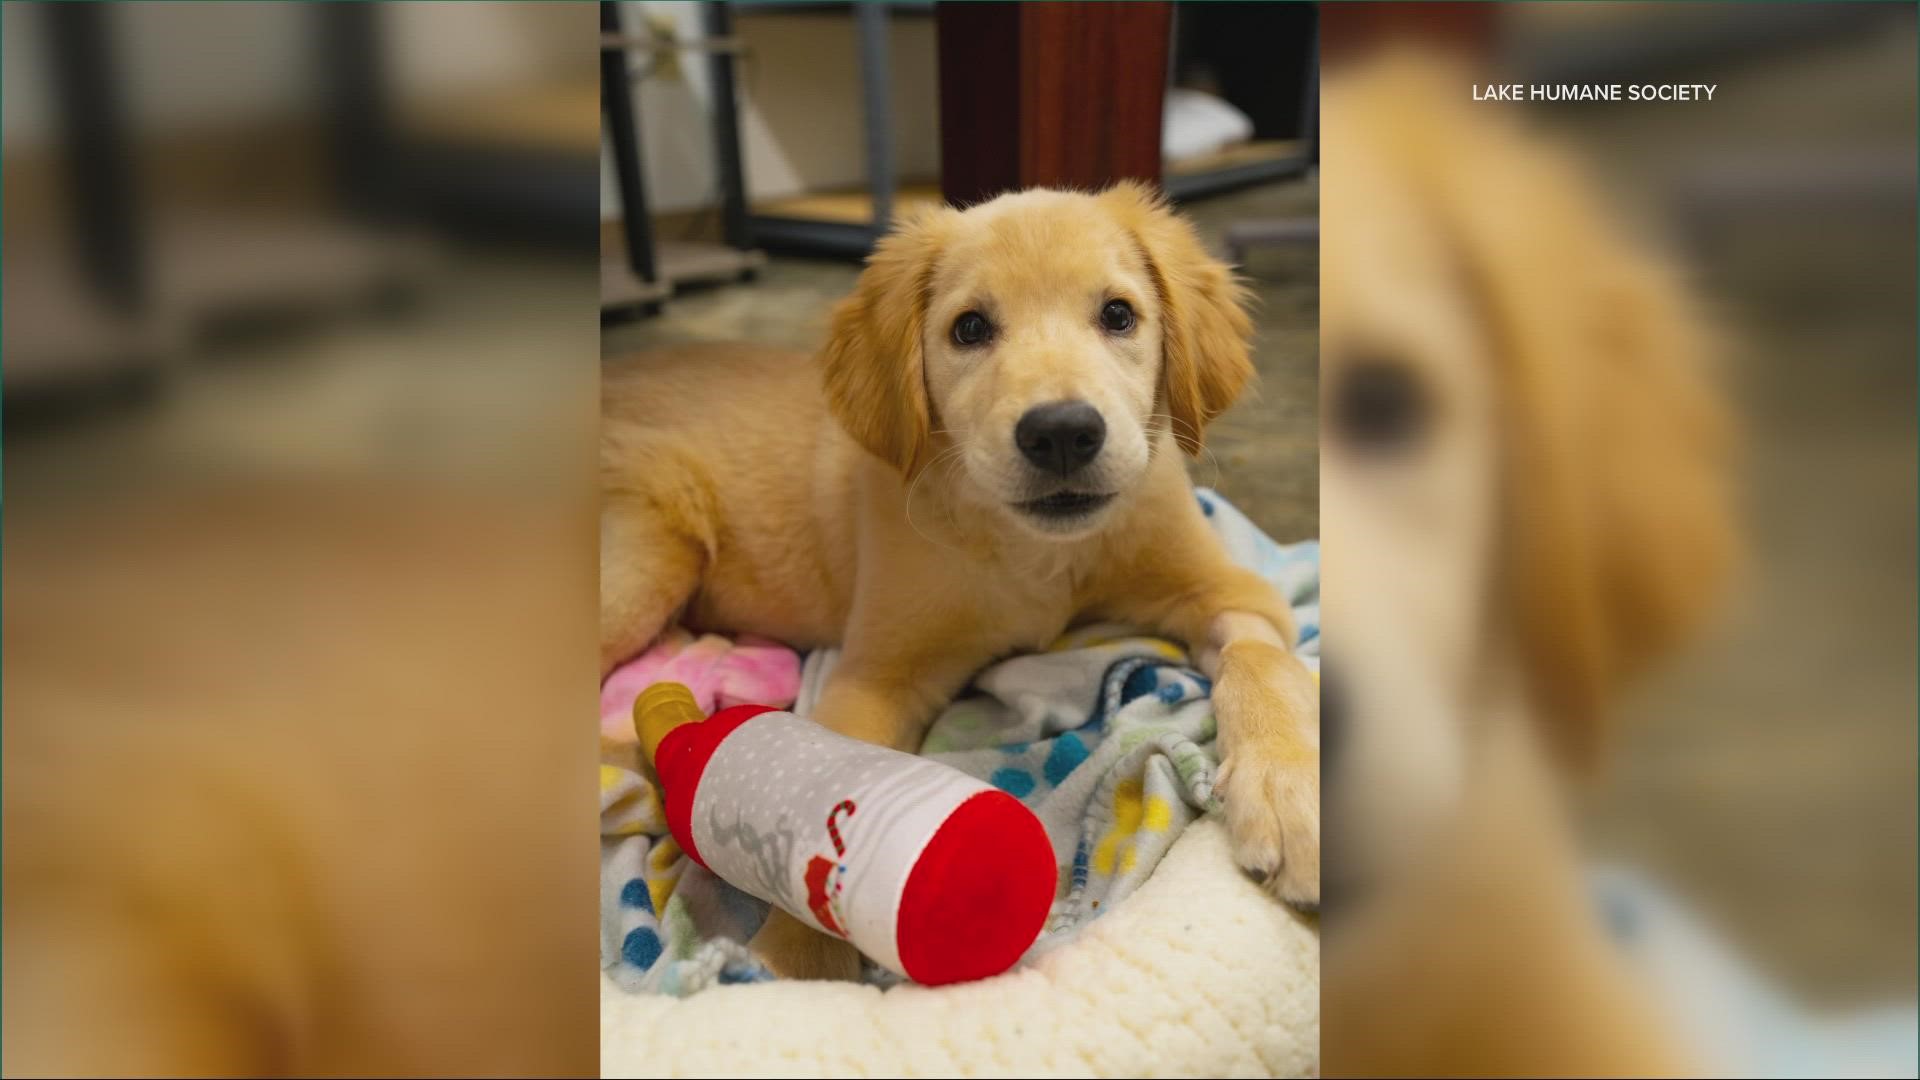 The golden retriever pup's leg is broken, possibly from abuse.